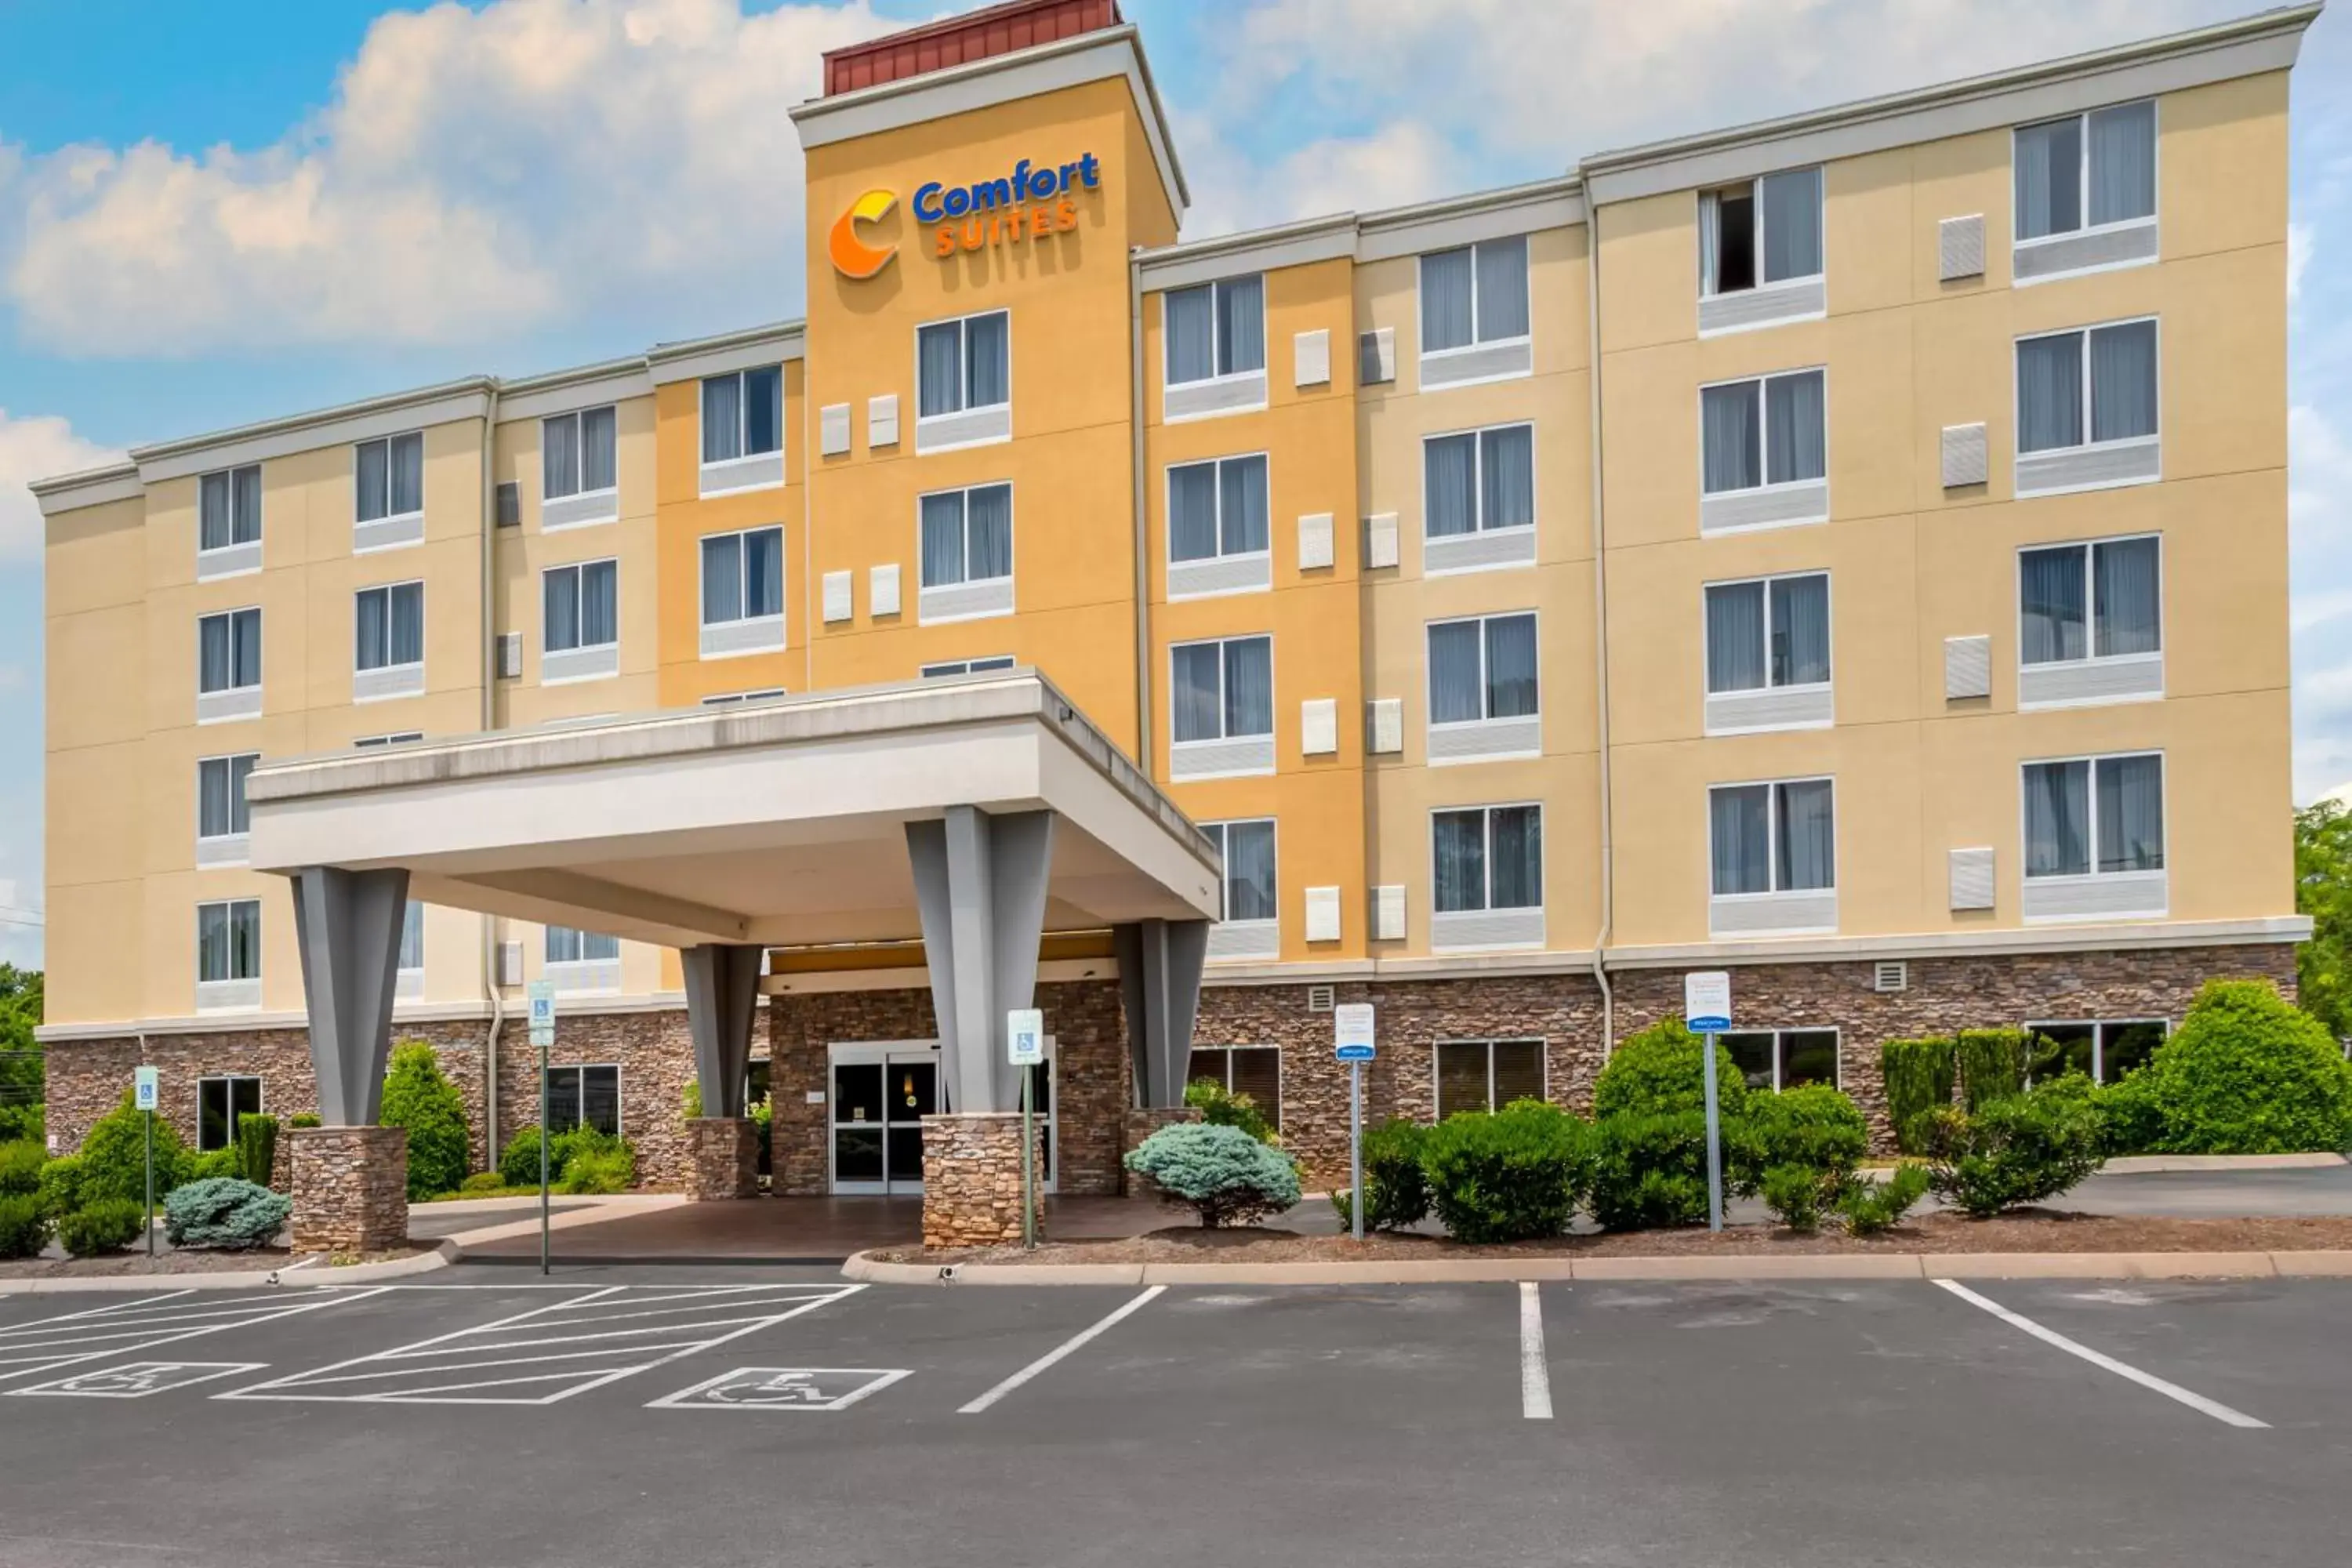 Property building in Comfort Suites North Knoxville